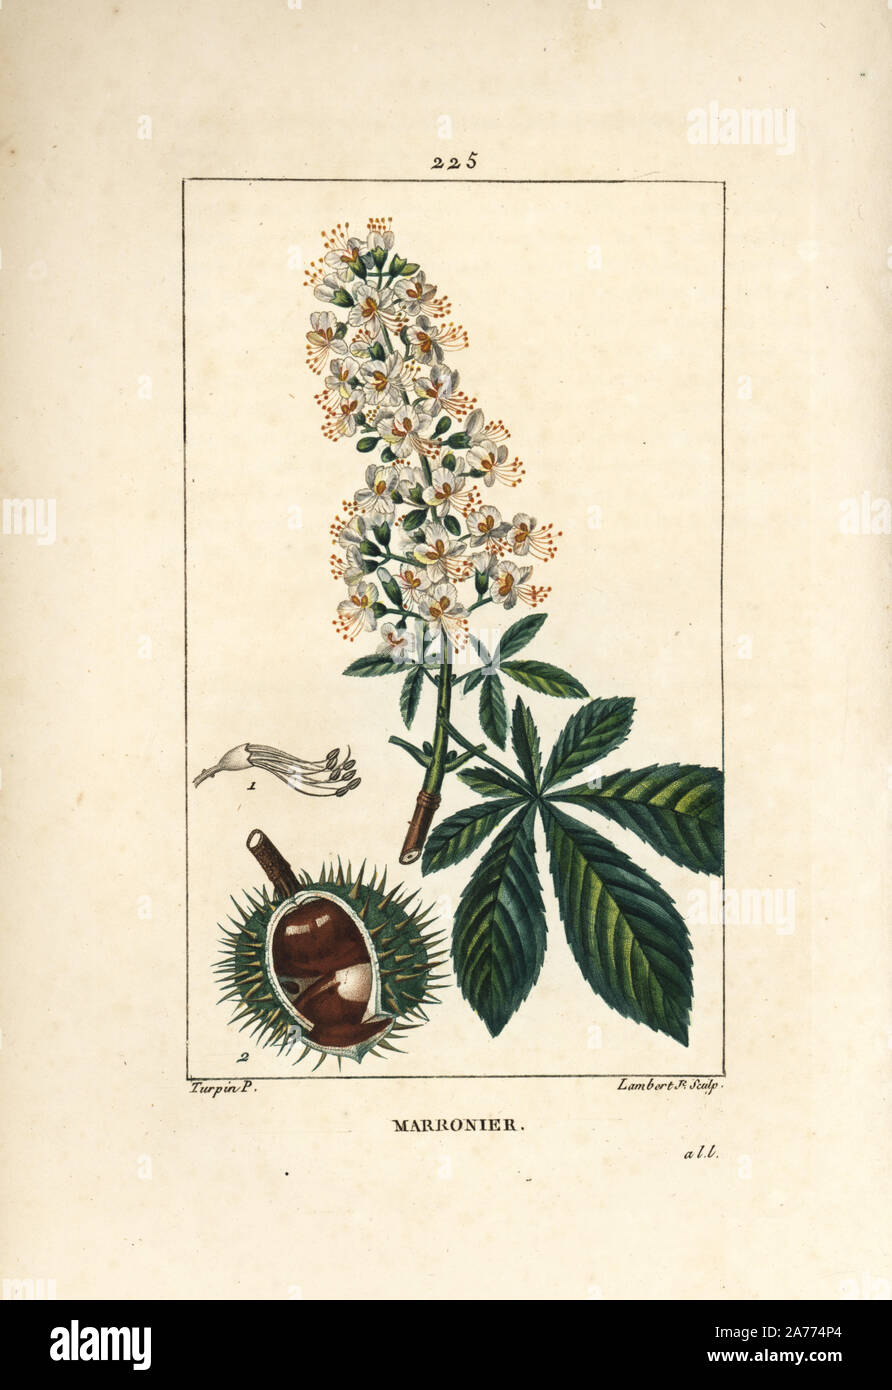 Horsechestnut, Aesculus hippocastanum. Handcoloured stipple copperplate engraving by Lambert Junior from a drawing by Pierre Jean-Francois Turpin from Chaumeton, Poiret and Chamberet's 'La Flore Medicale,' Paris, Panckoucke, 1830. Turpin (17751840) was one of the three giants of French botanical art of the era alongside Pierre Joseph Redoute and Pancrace Bessa. Stock Photo